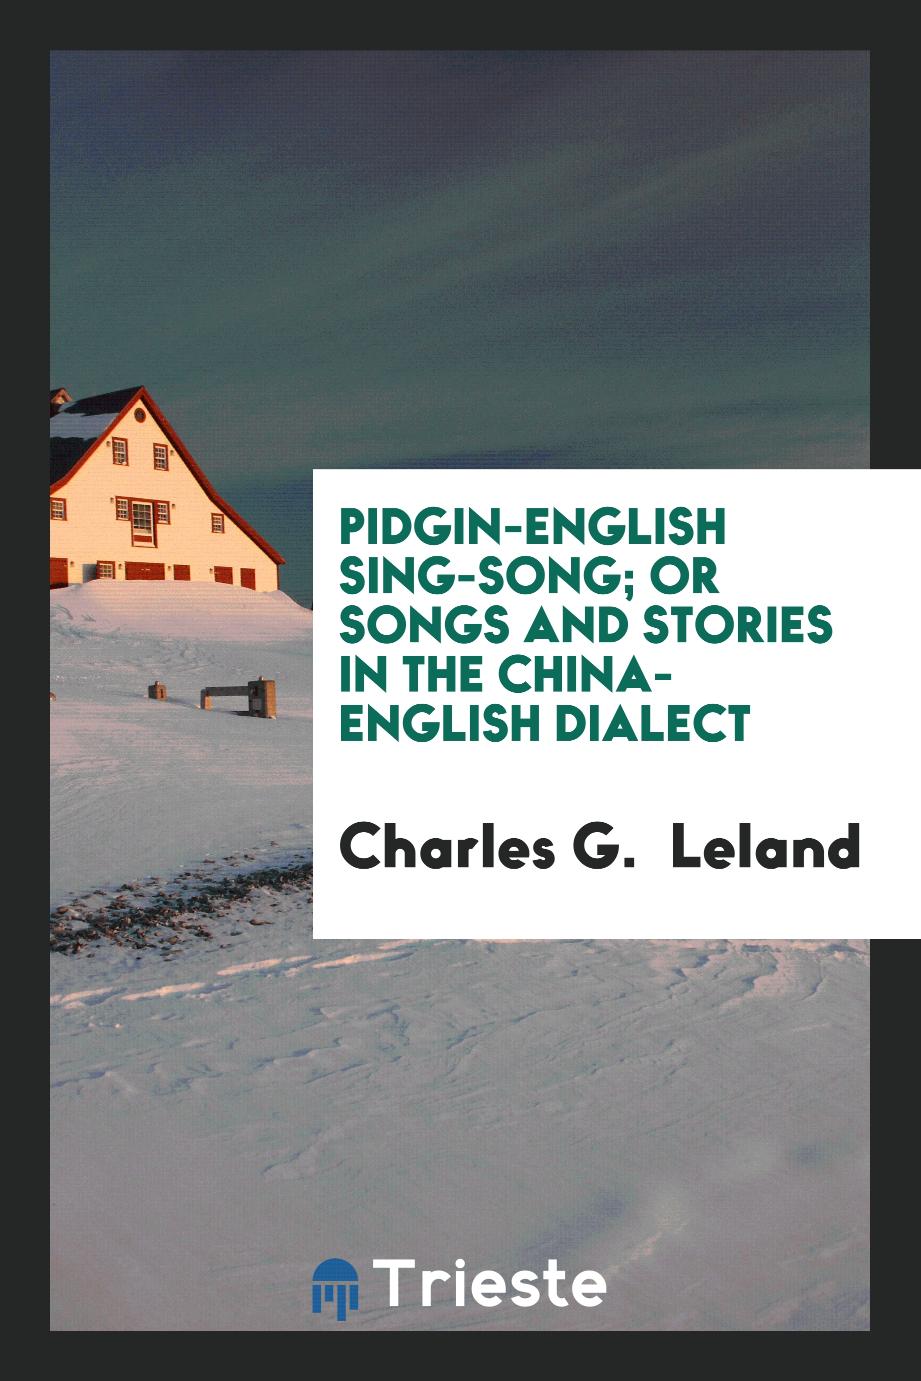 Pidgin-English Sing-Song; Or Songs and Stories in the China-English Dialect